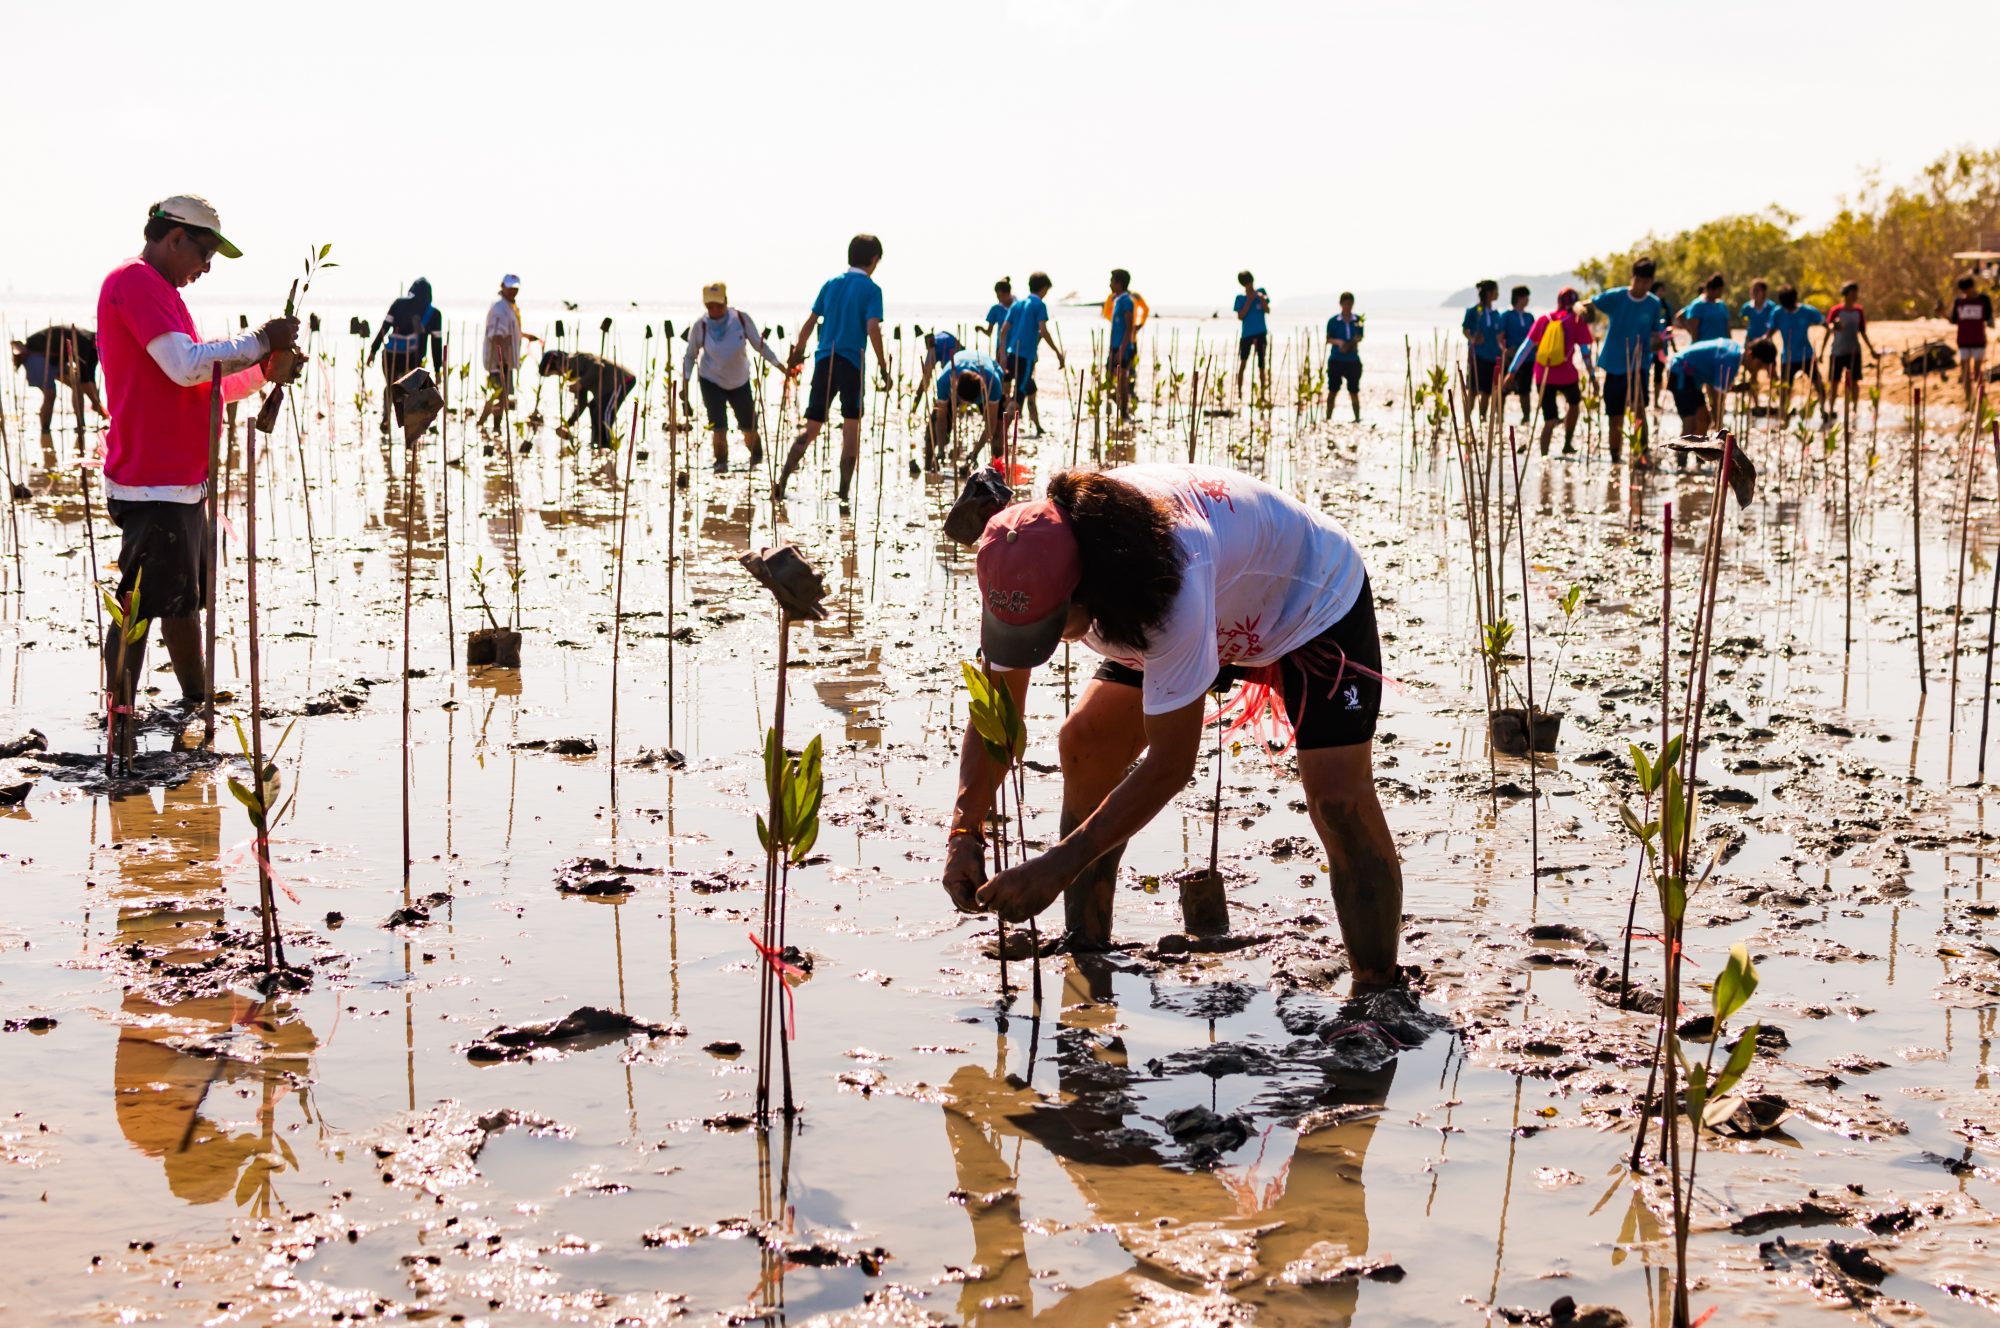 Phuket, Thailand - November 21, 2015: Volunteer from all over part of Phuket island working on plant young mangrove trees at the swamps nearby Saphan Hin public park